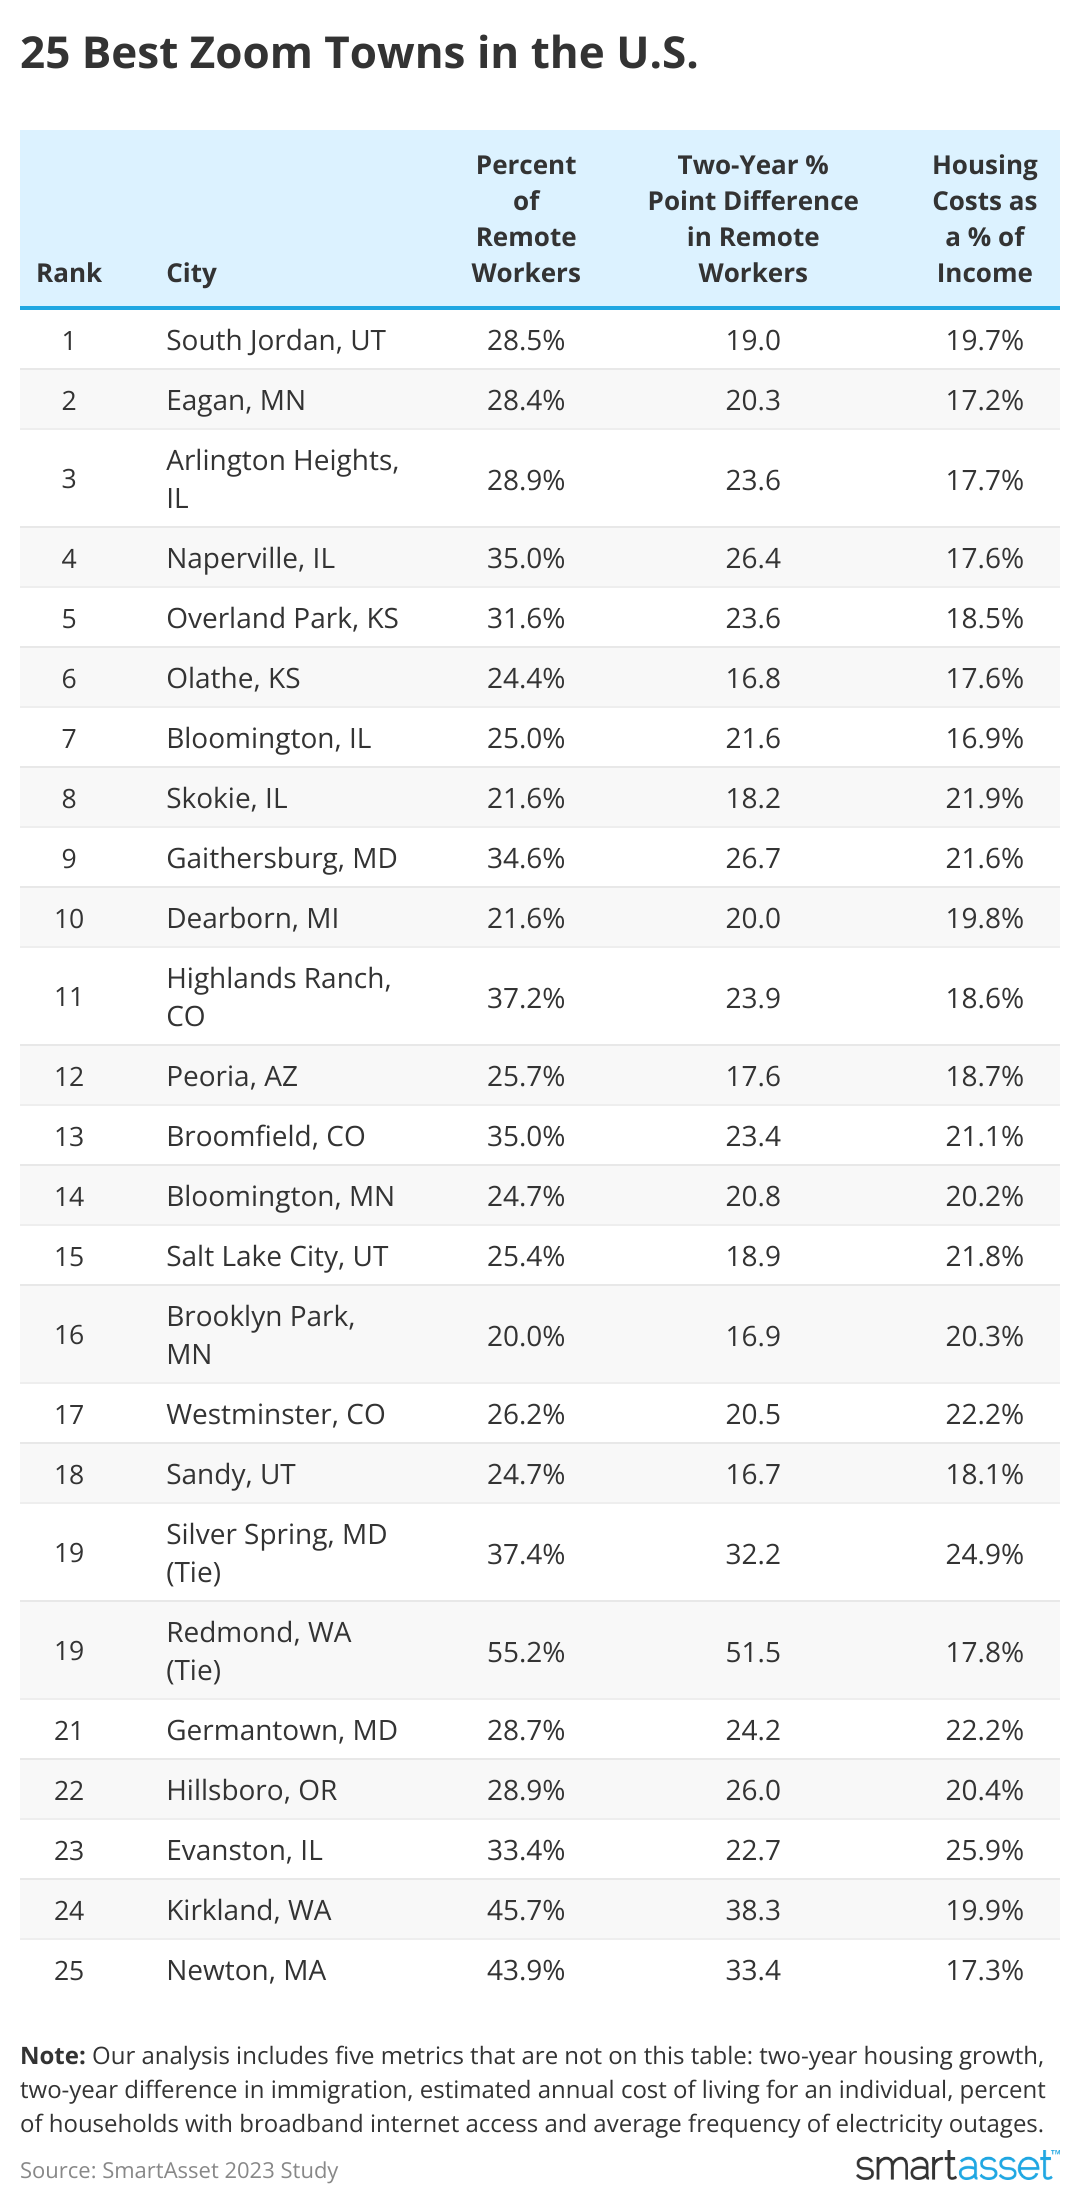 A table listing statistics about the top 25 Zoom towns in the U.S.